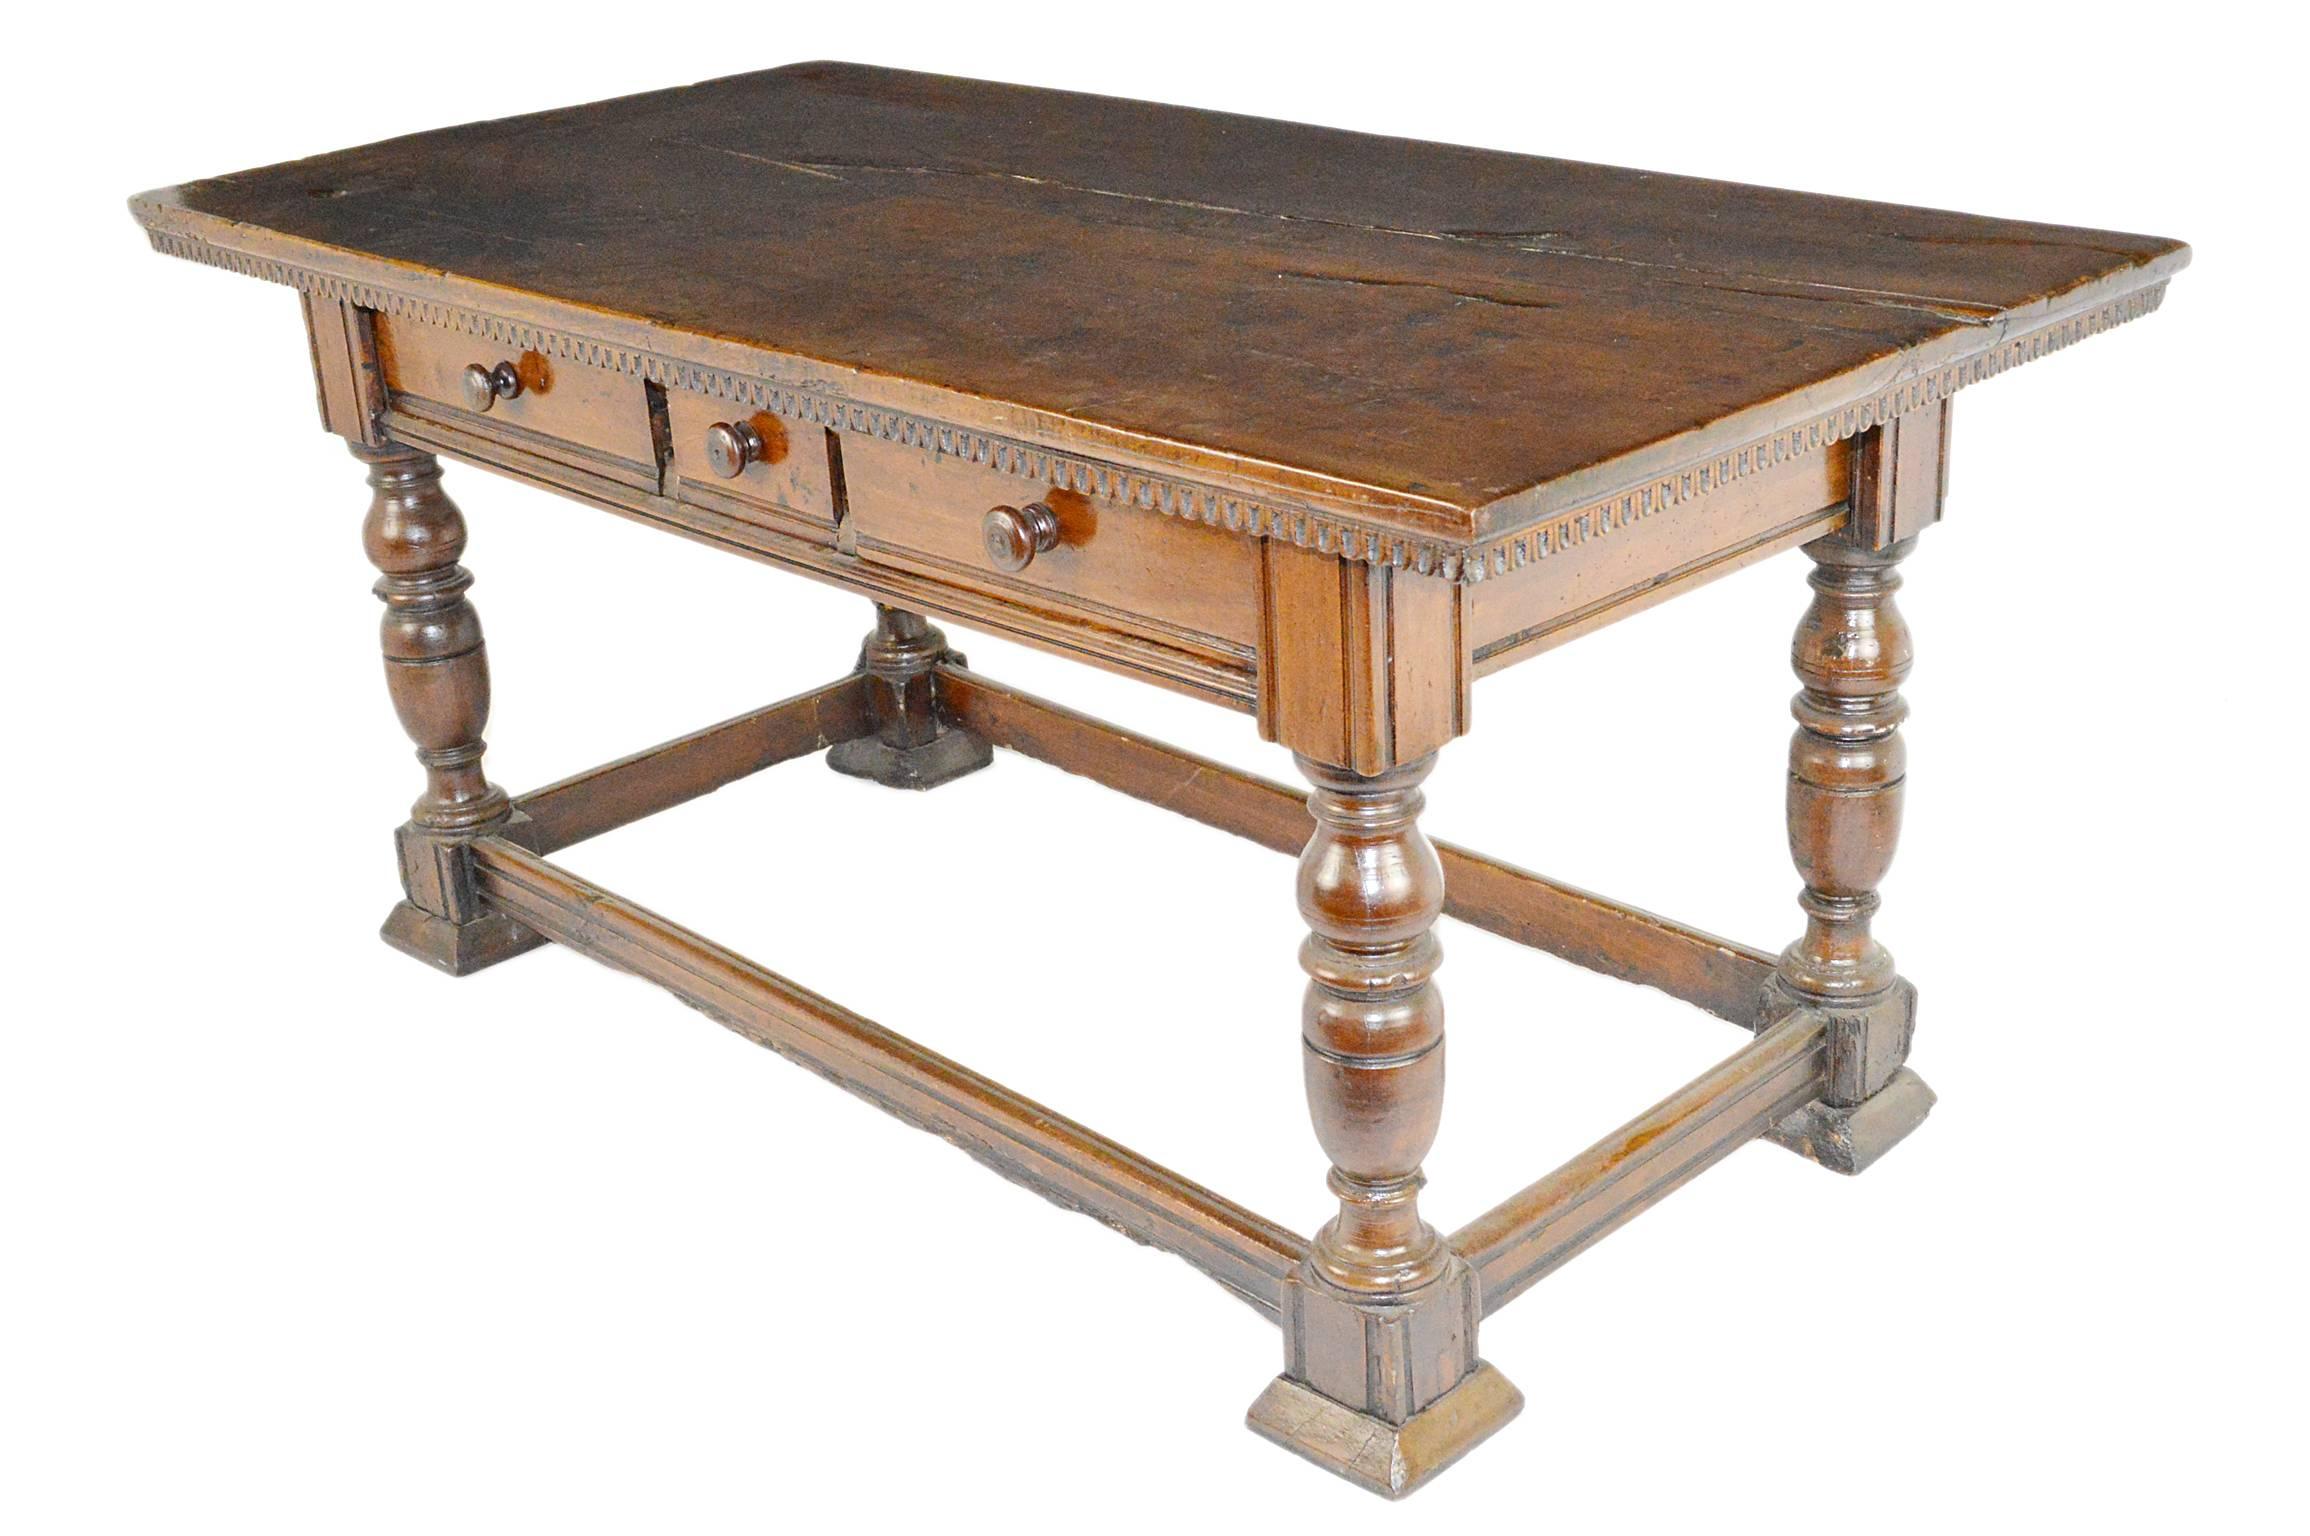 17th-18th century Tuscan walnut table. Having a rectangular top above a frieze of three drawers, Raised on four turned legs, with perimeter stretcher. A gorgeous table, with rich warm patina throughout.